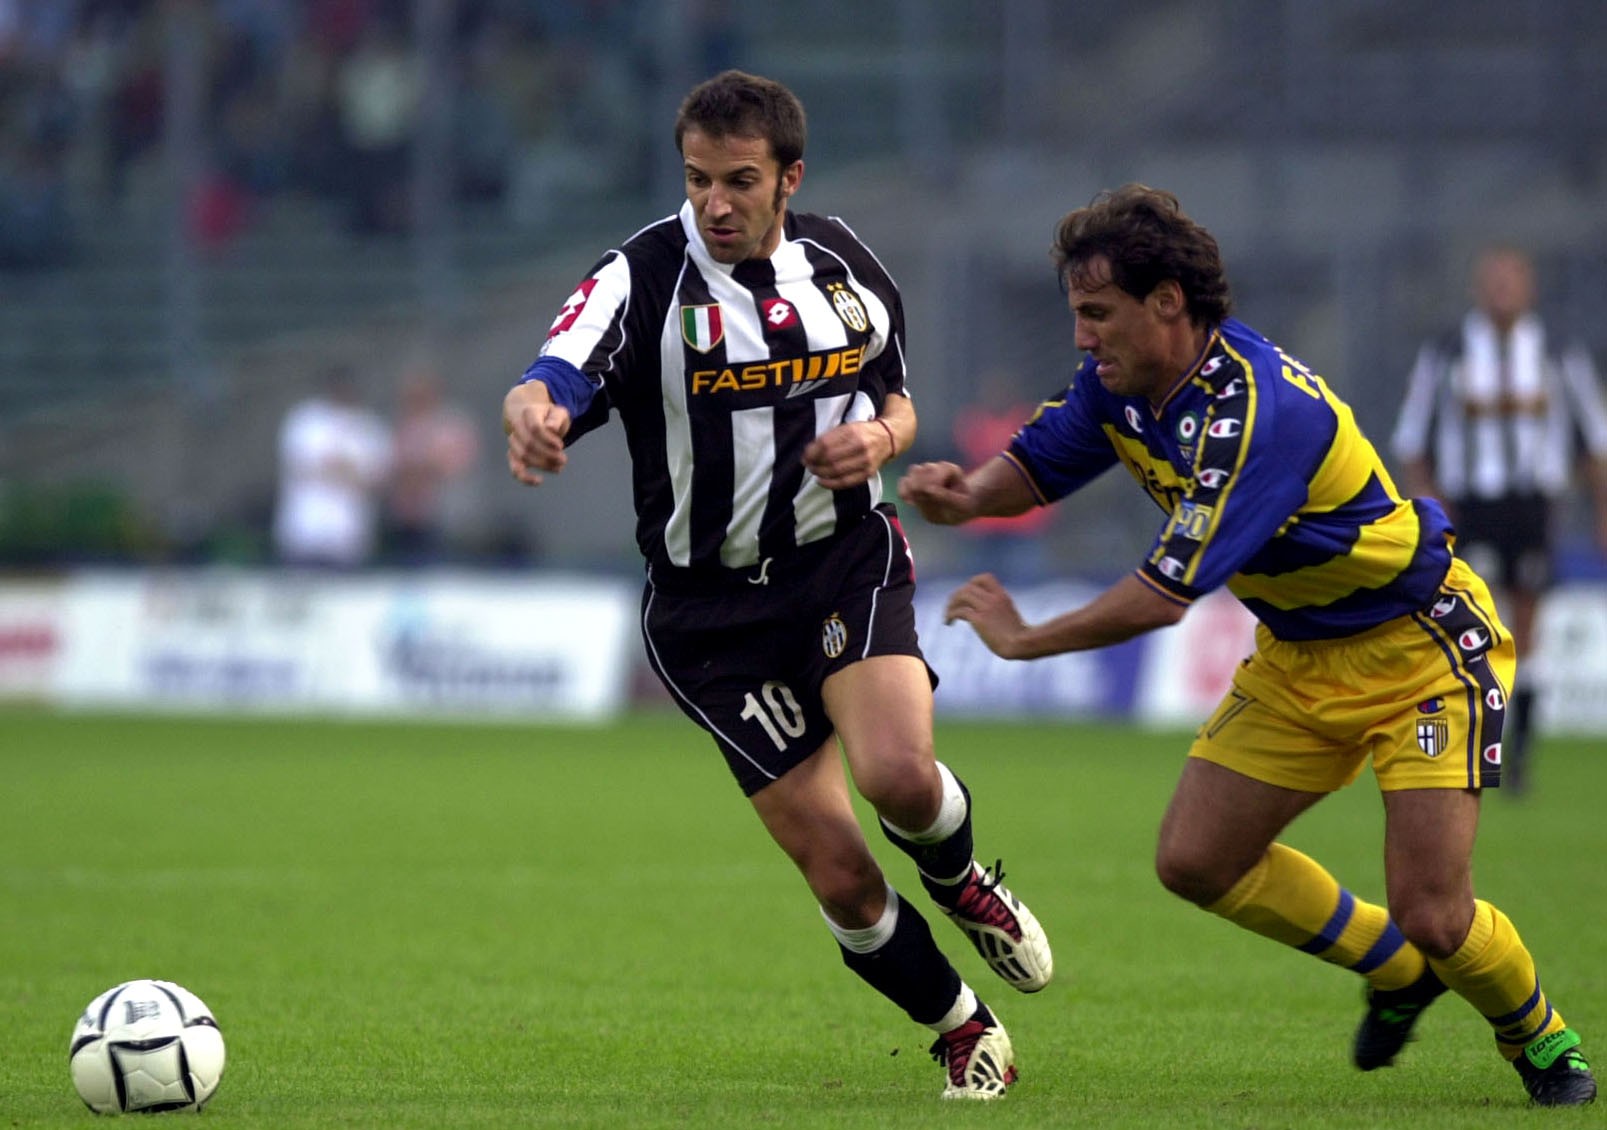 Juventus Soccer Legend Alessandro Del Piero On Life After ...